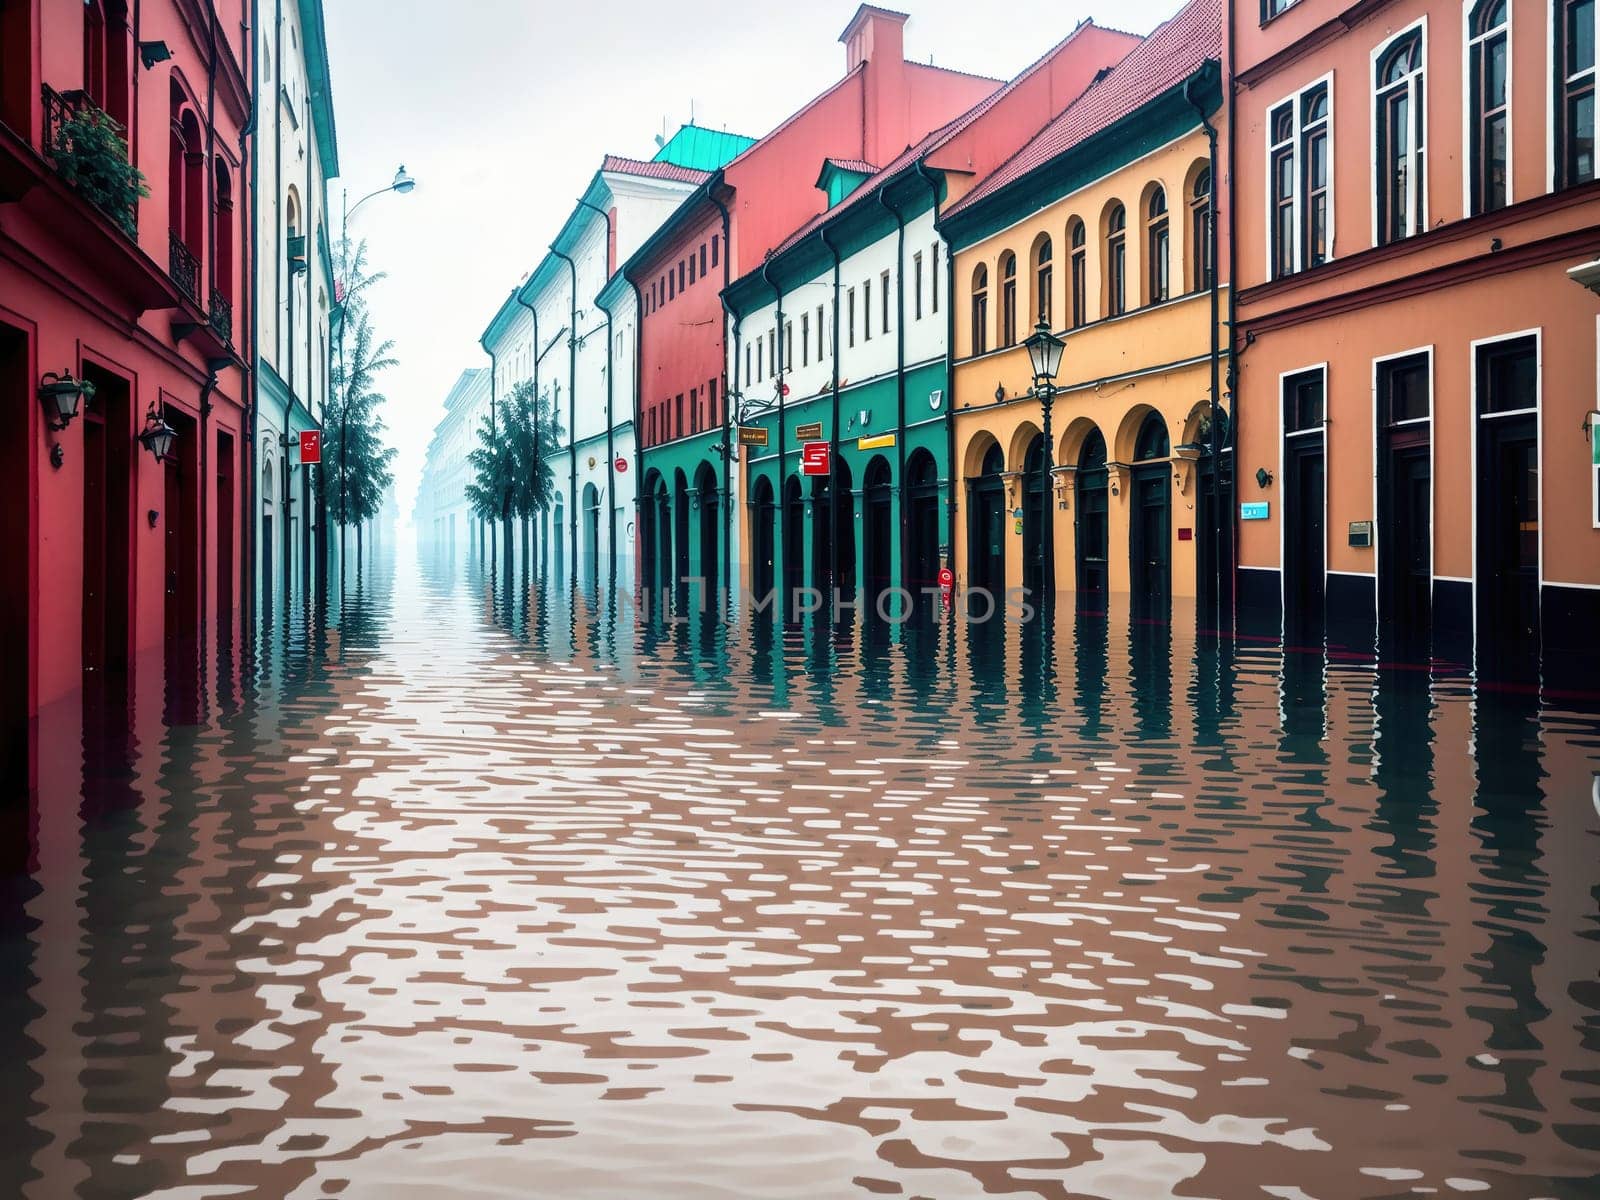 The image shows a flooded street with buildings on either side, with people standing on the sidewalk looking at the water.